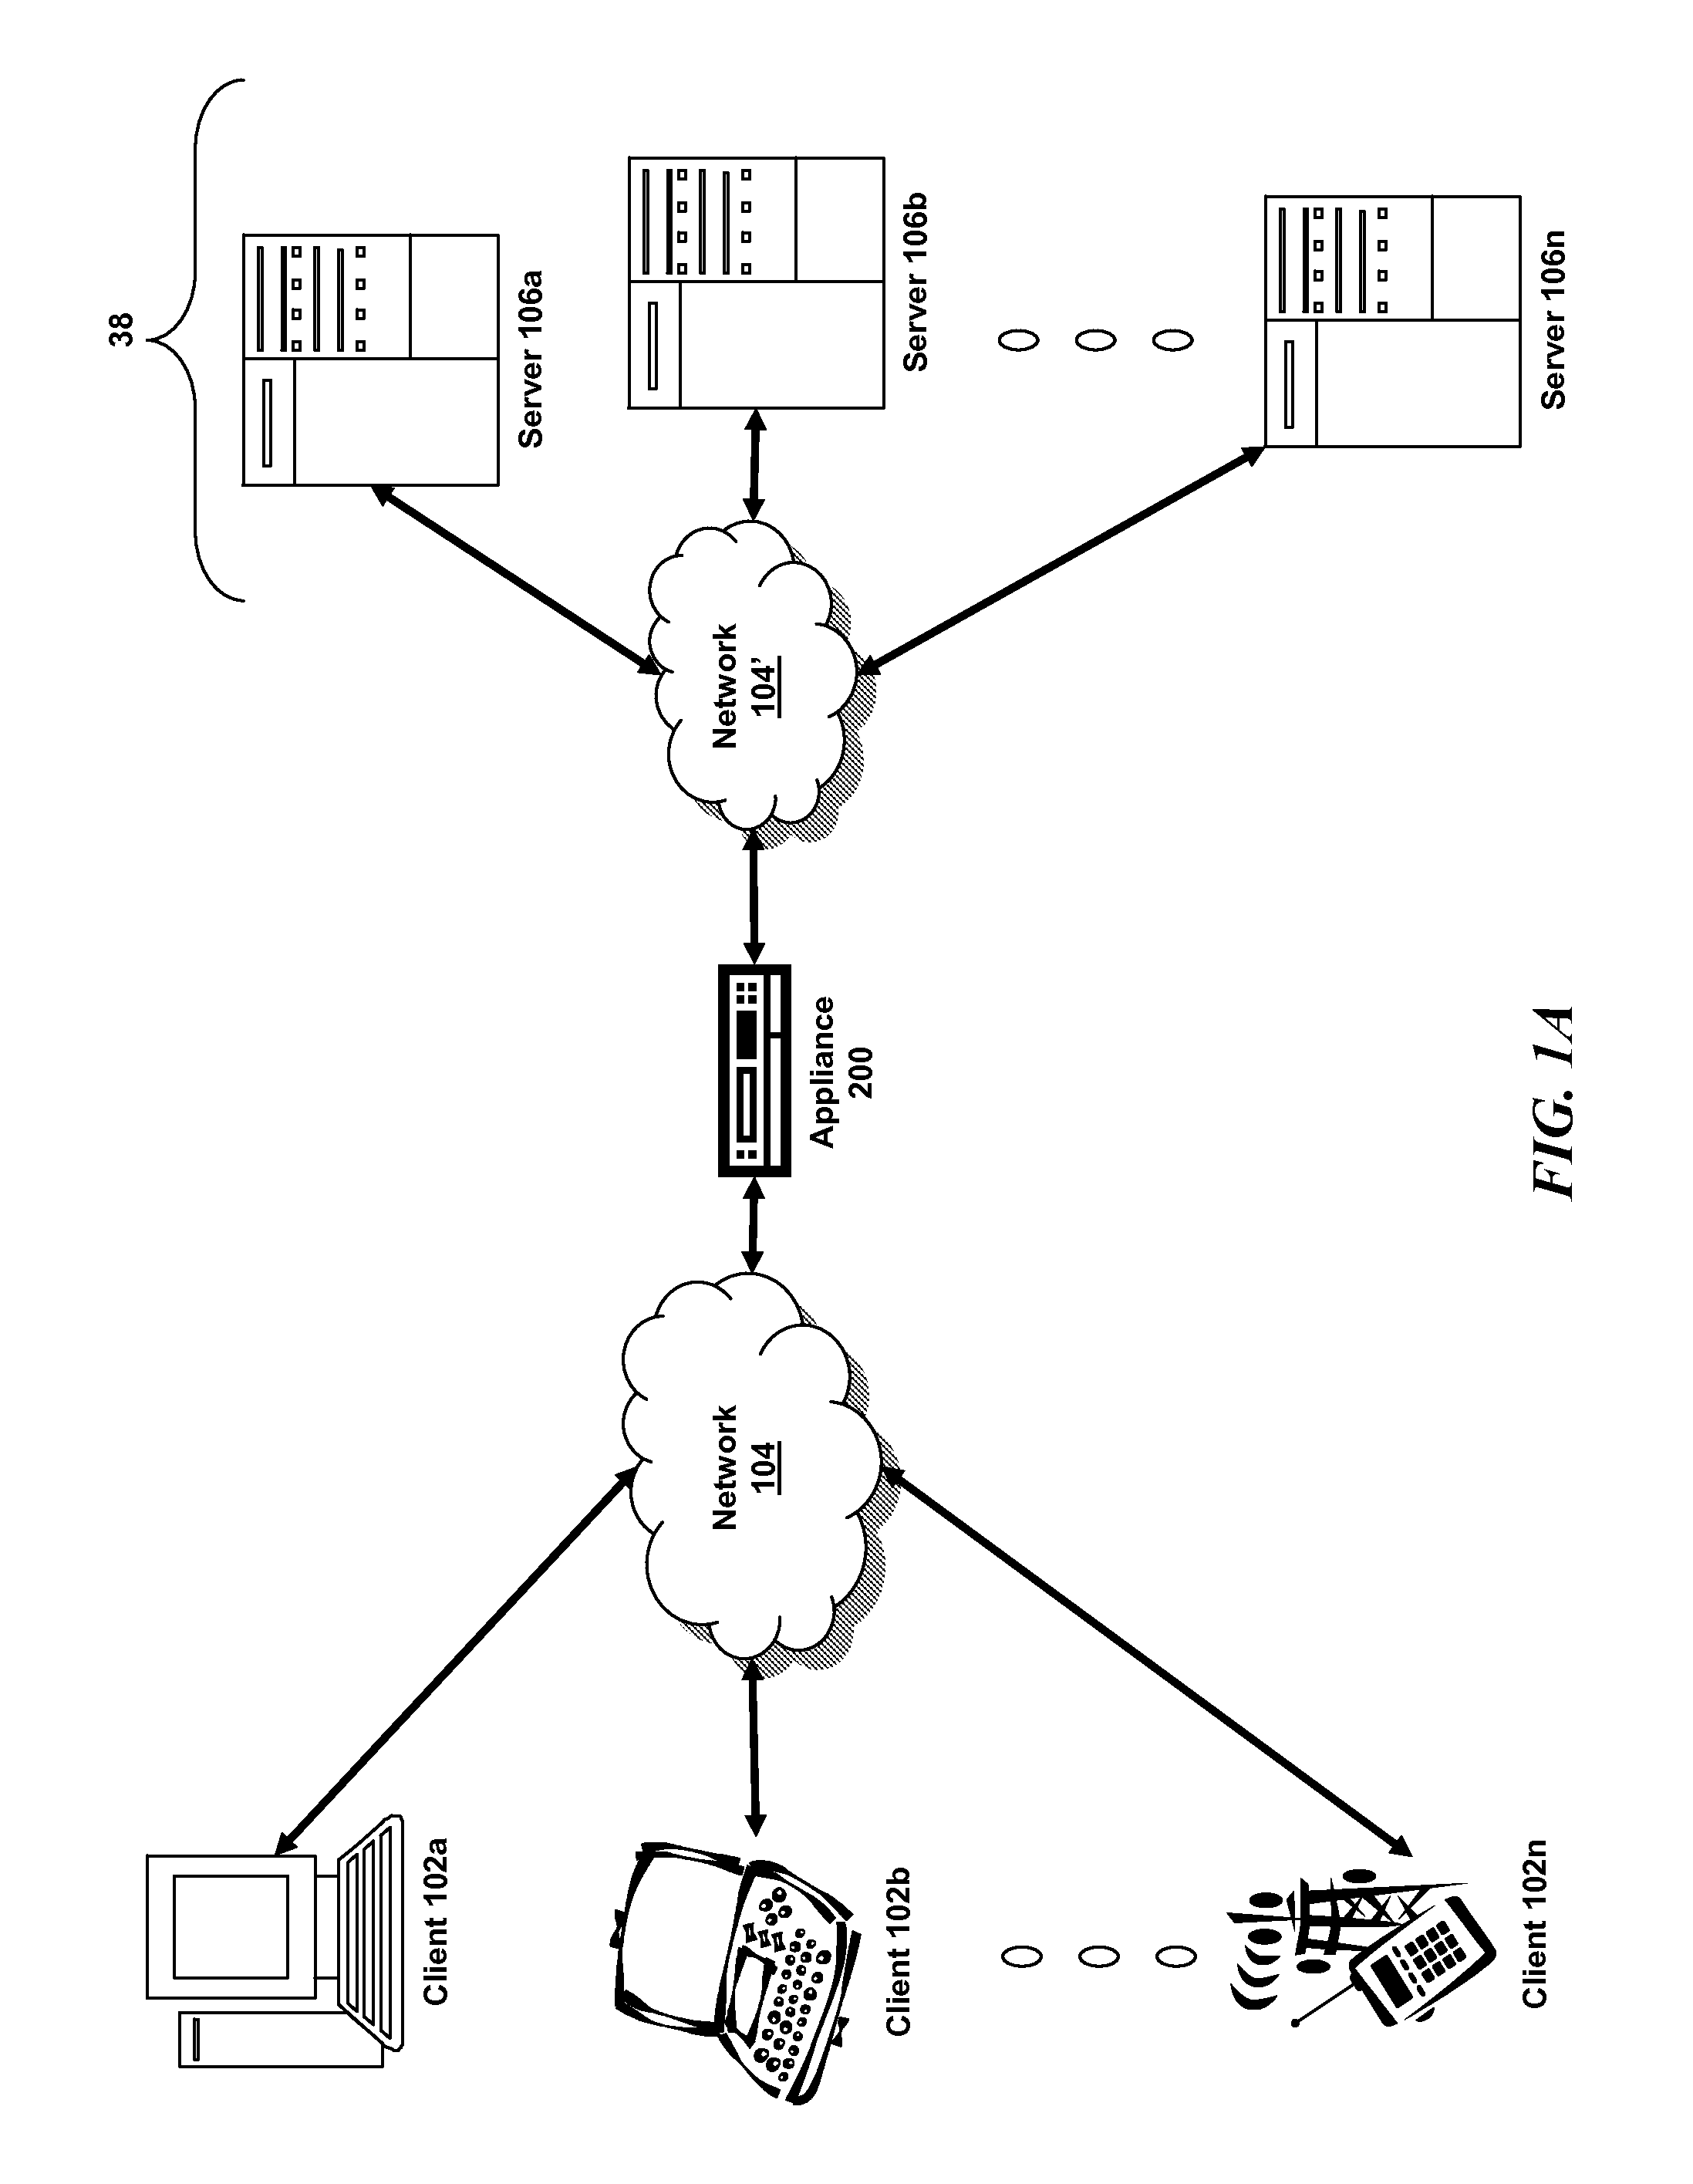 Systems and methods for providing a smart group